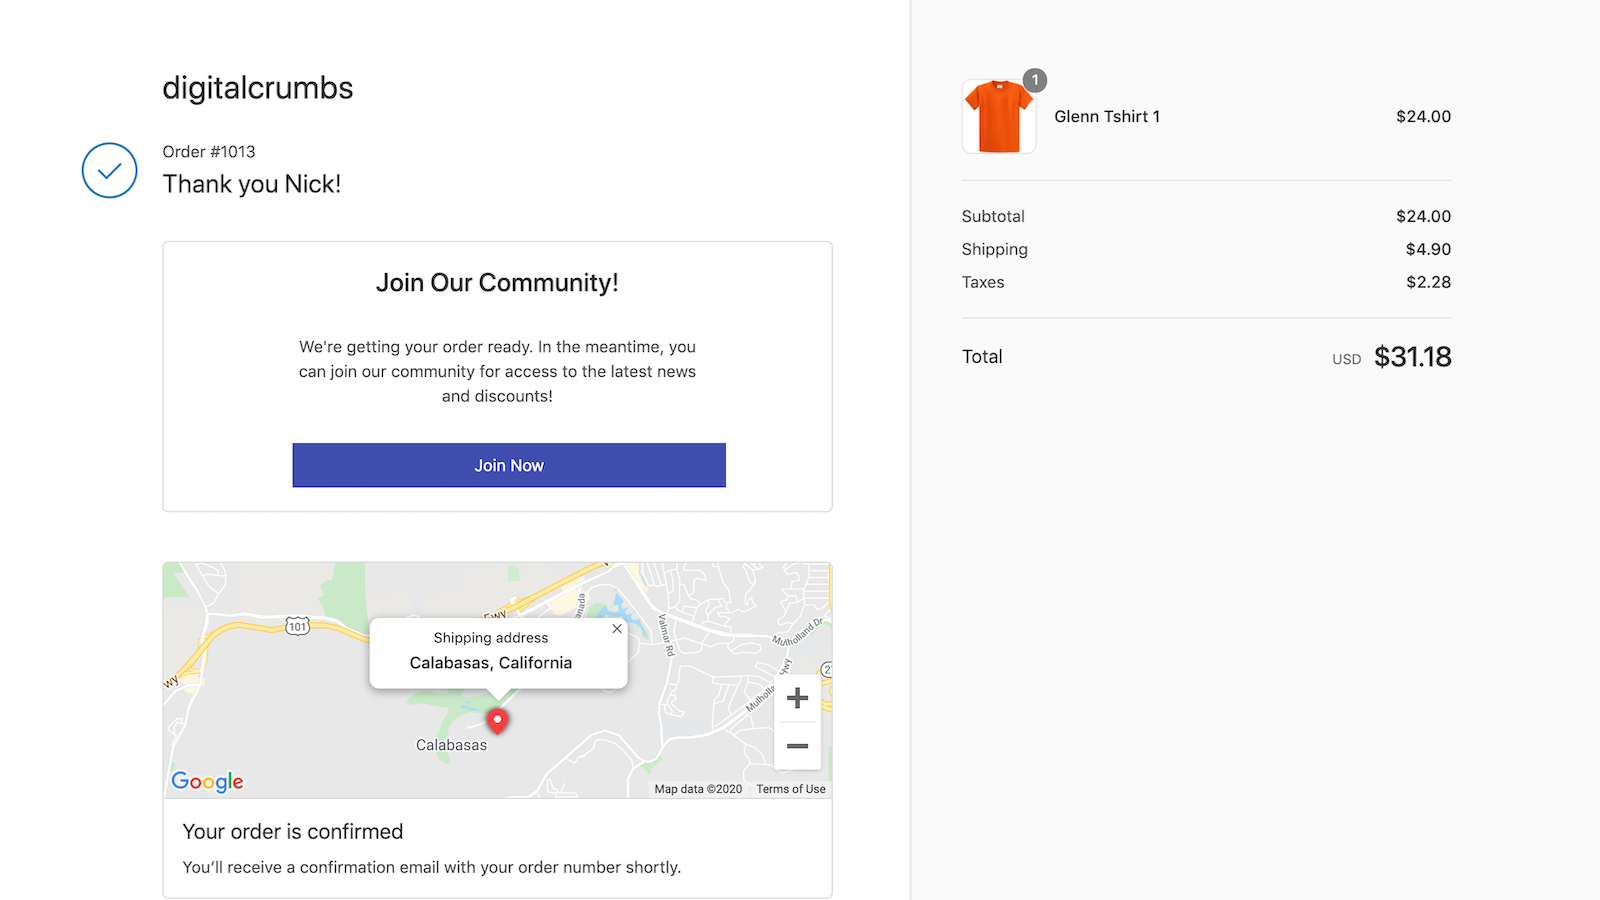 Send customers to your community after checkout.